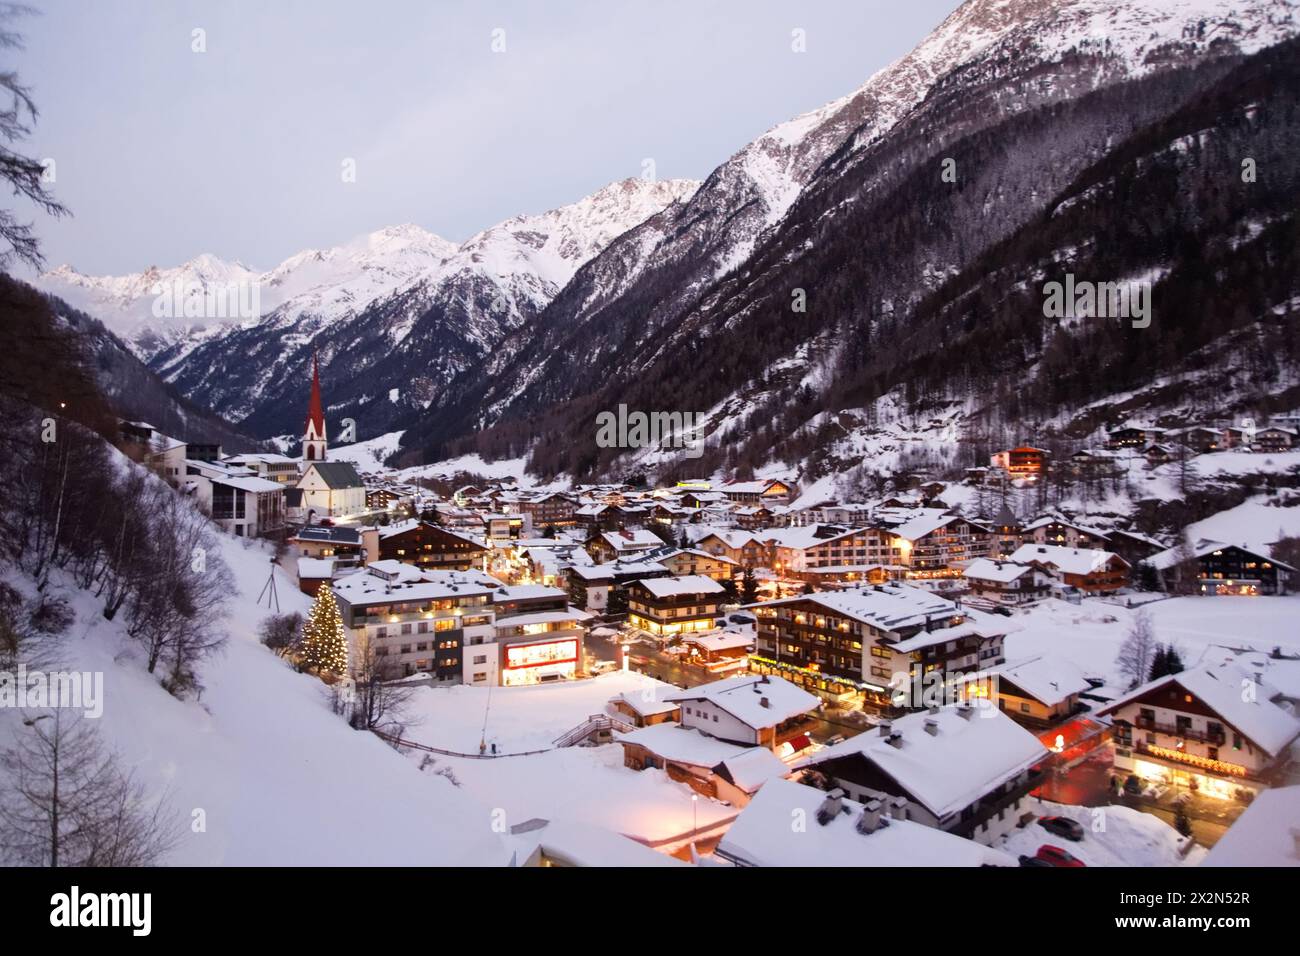 Night view of village in mountains Stock Photo